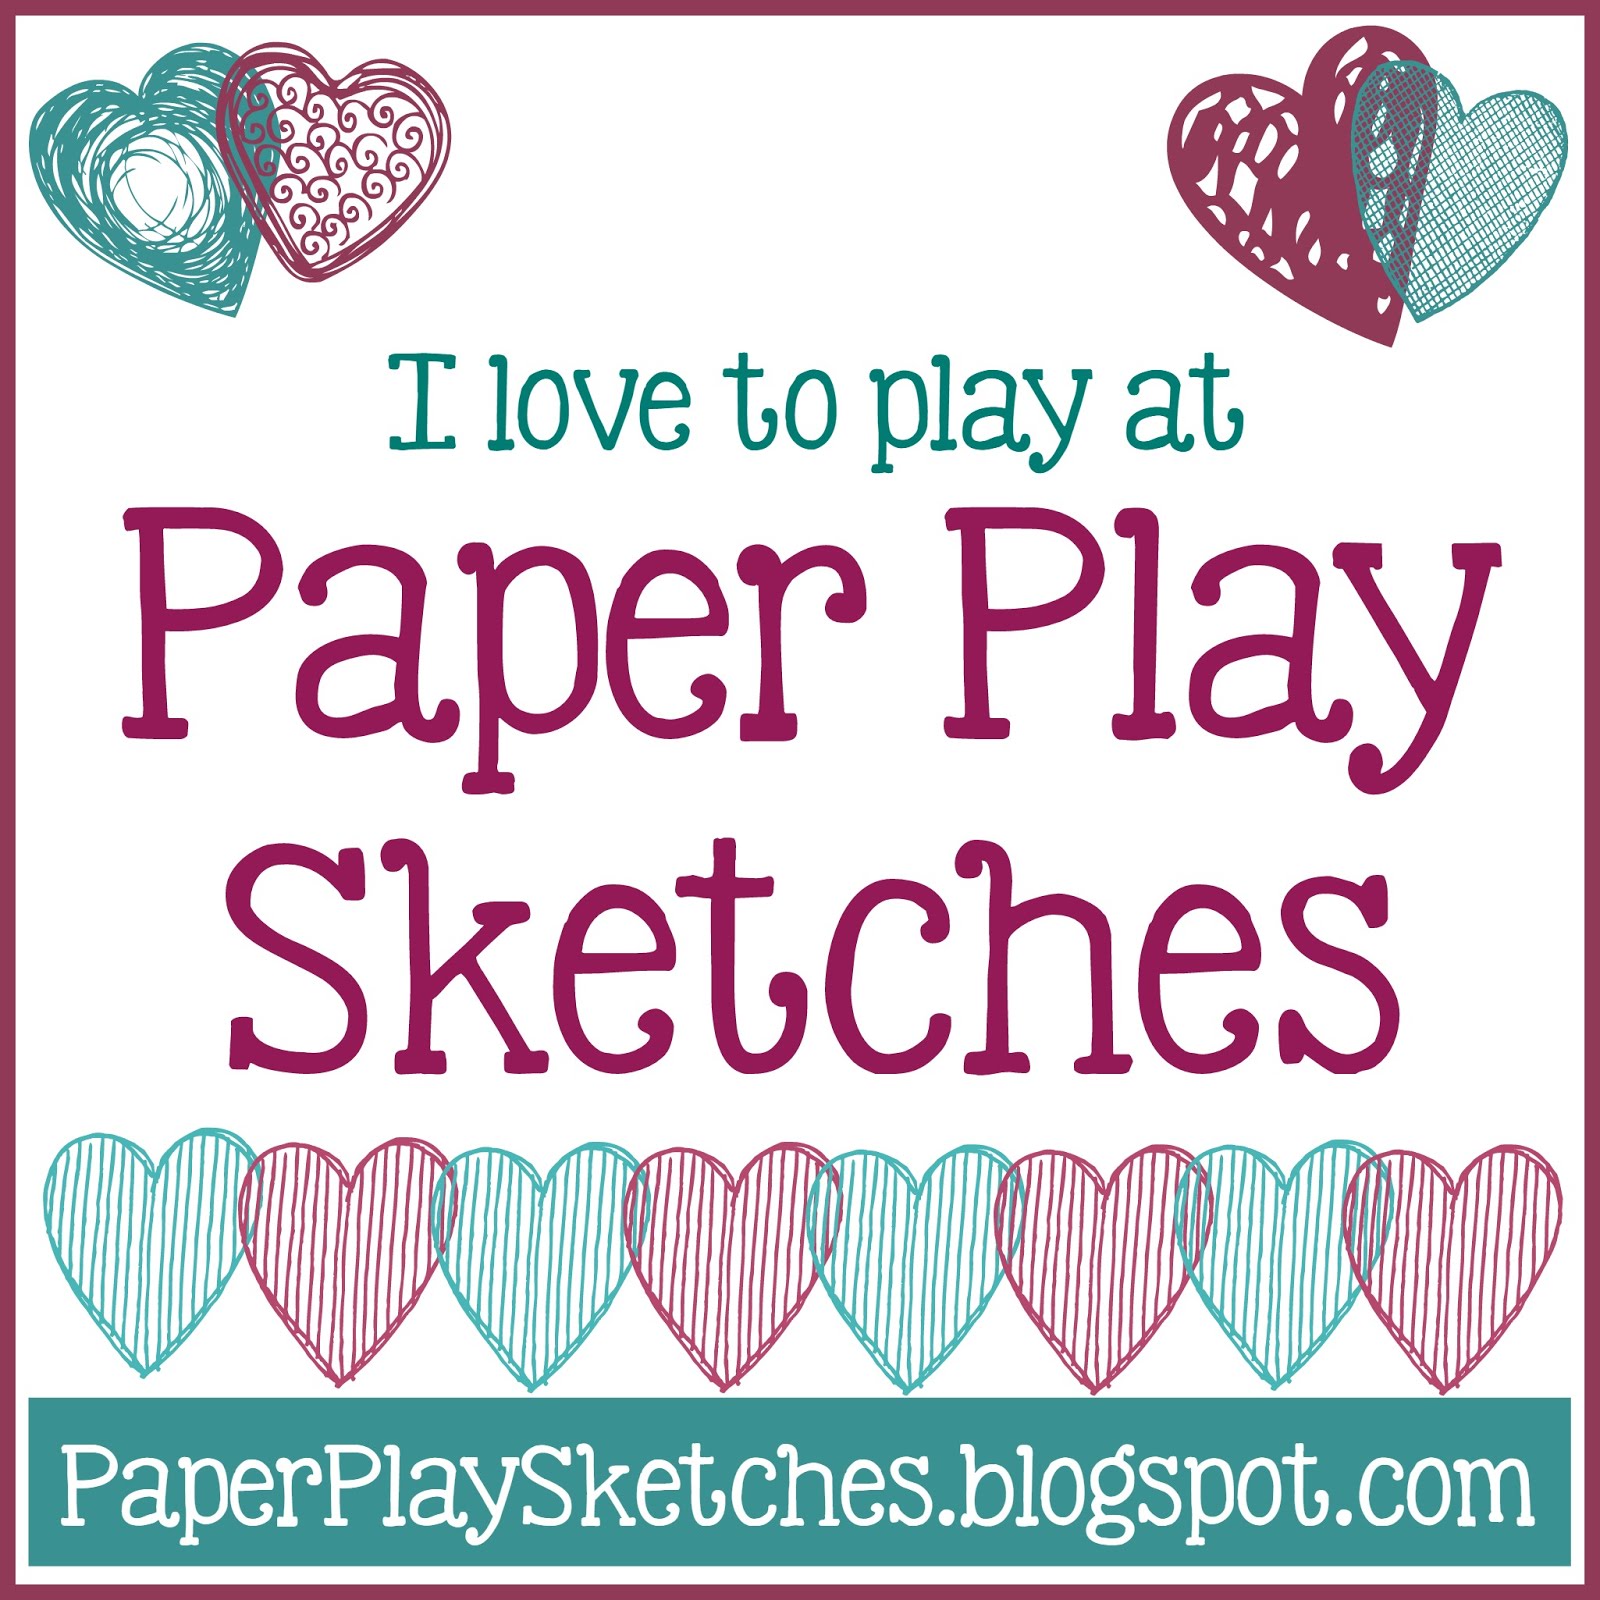 Paper Play Sketches